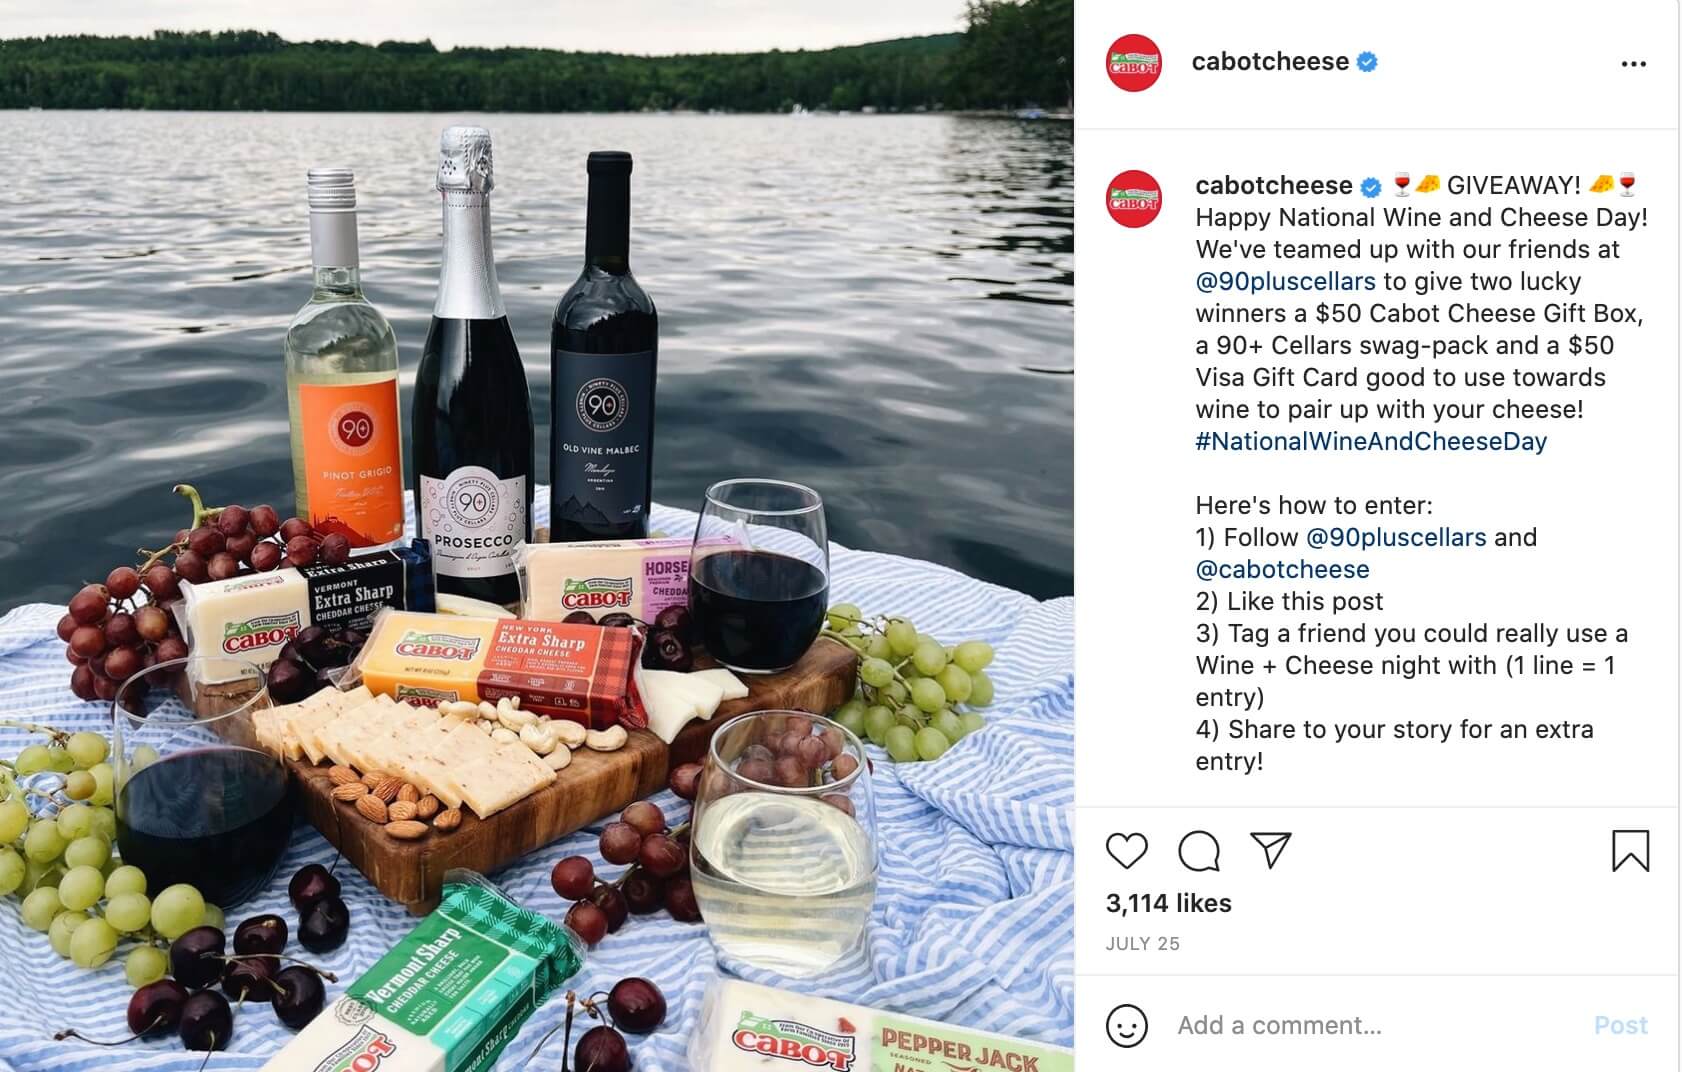 Instagram post example from Cabot Cheese